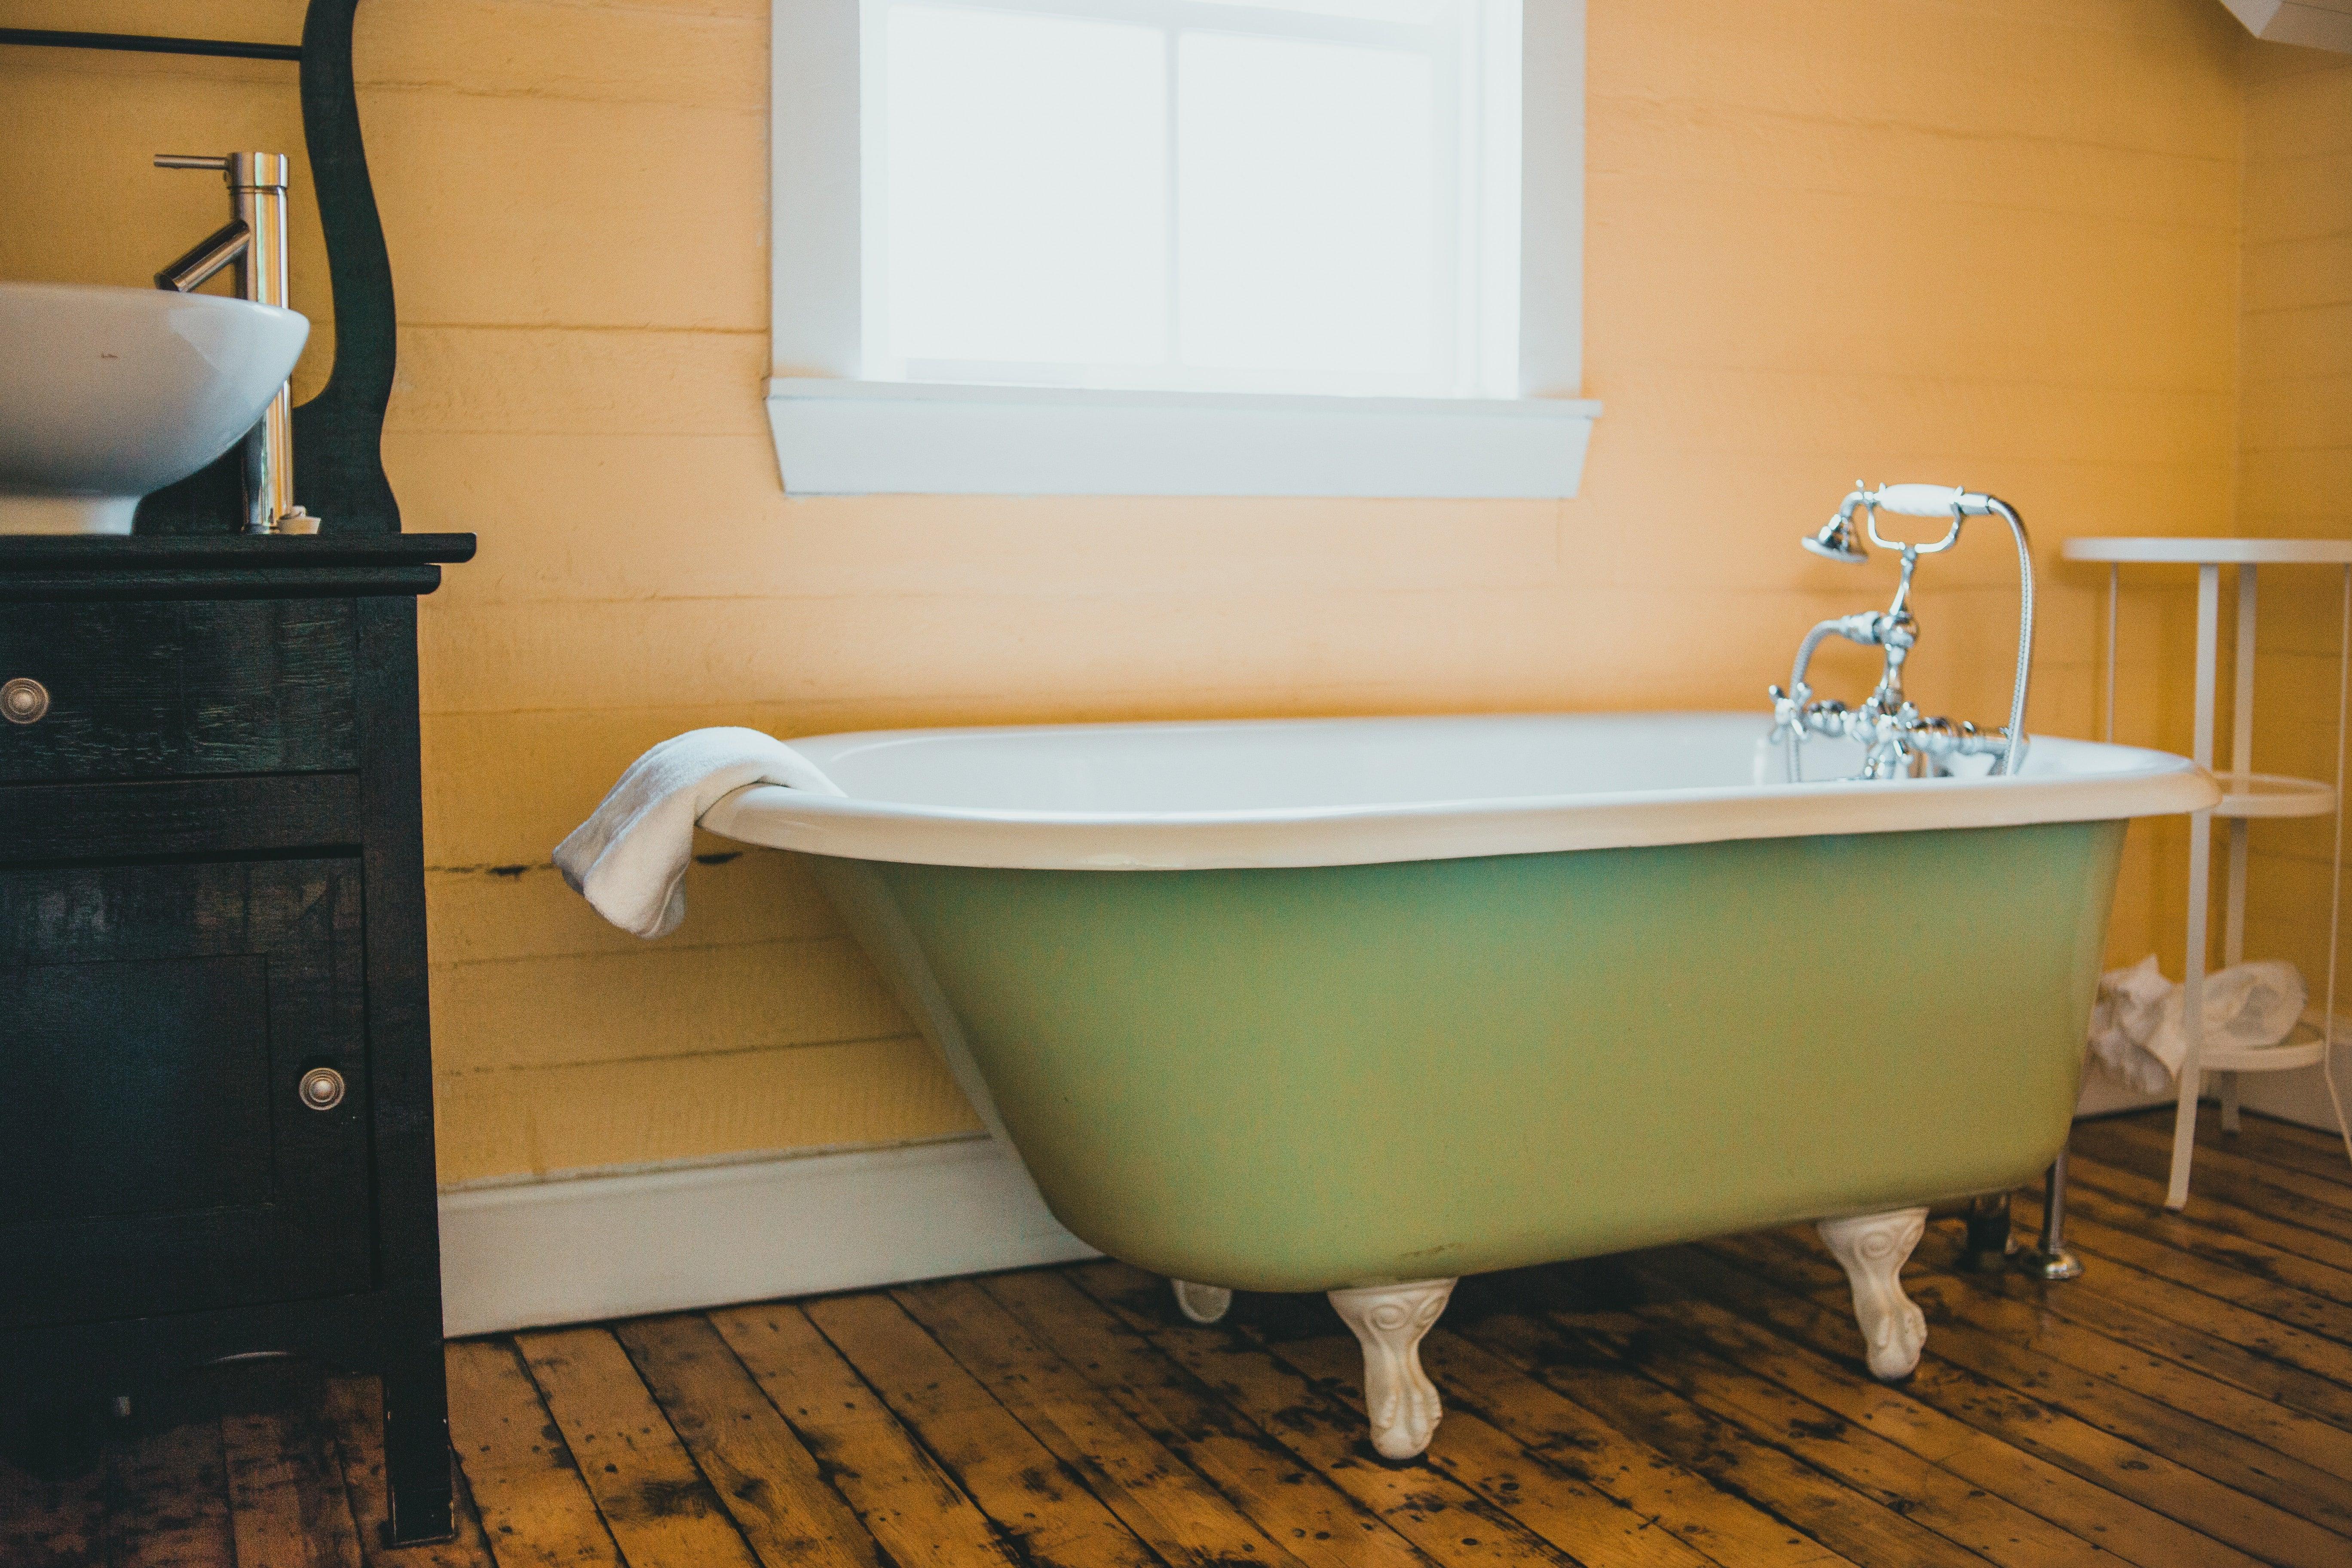 The Evolution Of Bathtubs: From Ancient Civilizations To Today's Luxury Models - Bathroom Design Center